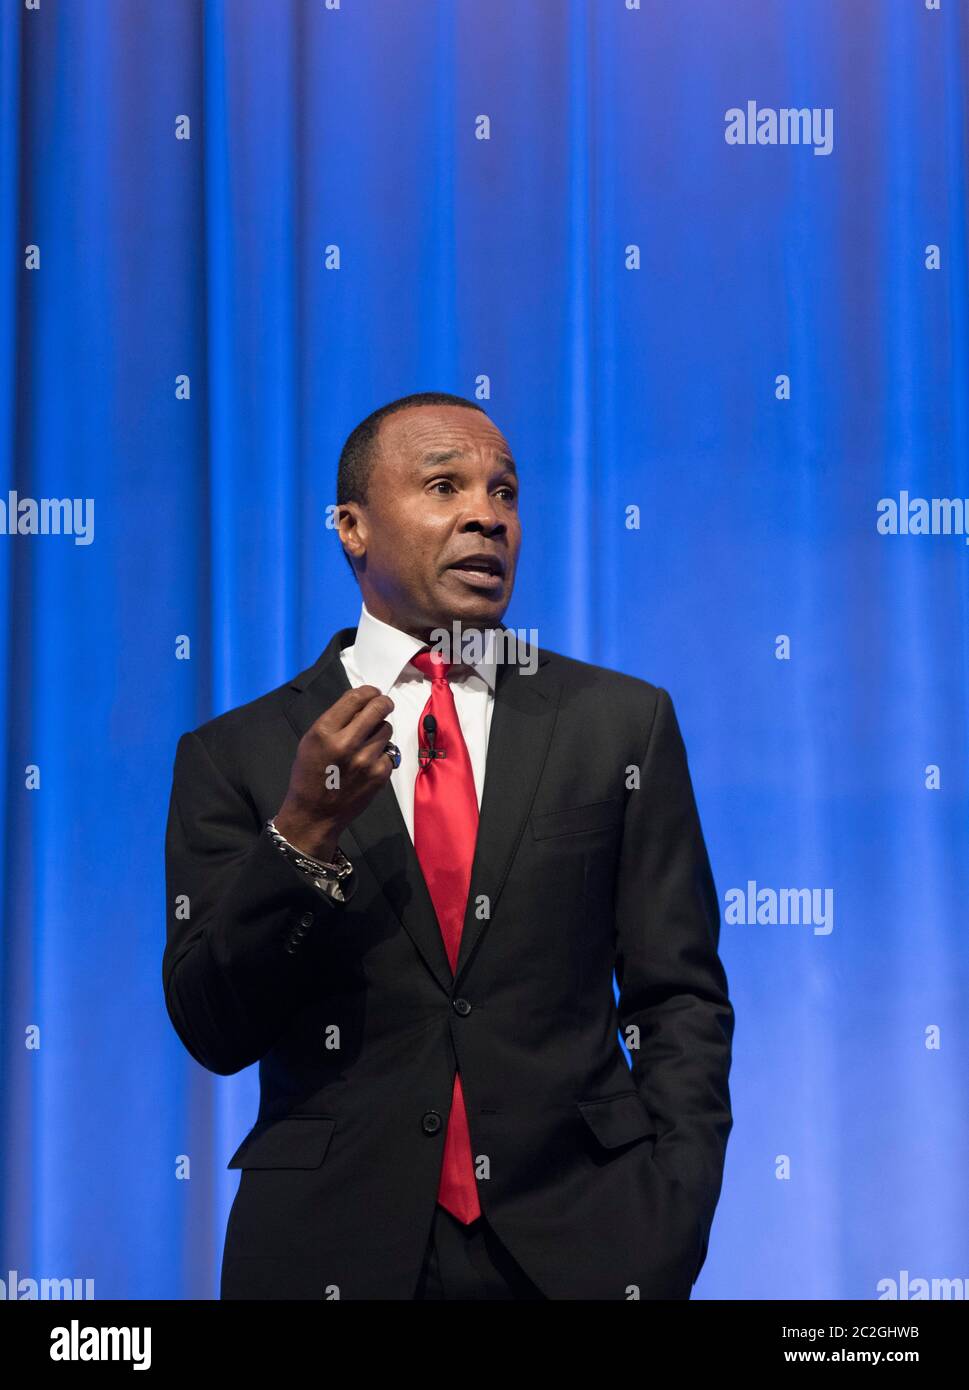 Houston Texas USA, April 14, 2016: Legendary boxer Sugar Ray Leonard, who won world titles in five different weight divisions, delivers a motivational and inspirational message at a business convention.  ©Bob Daemmrich Stock Photo